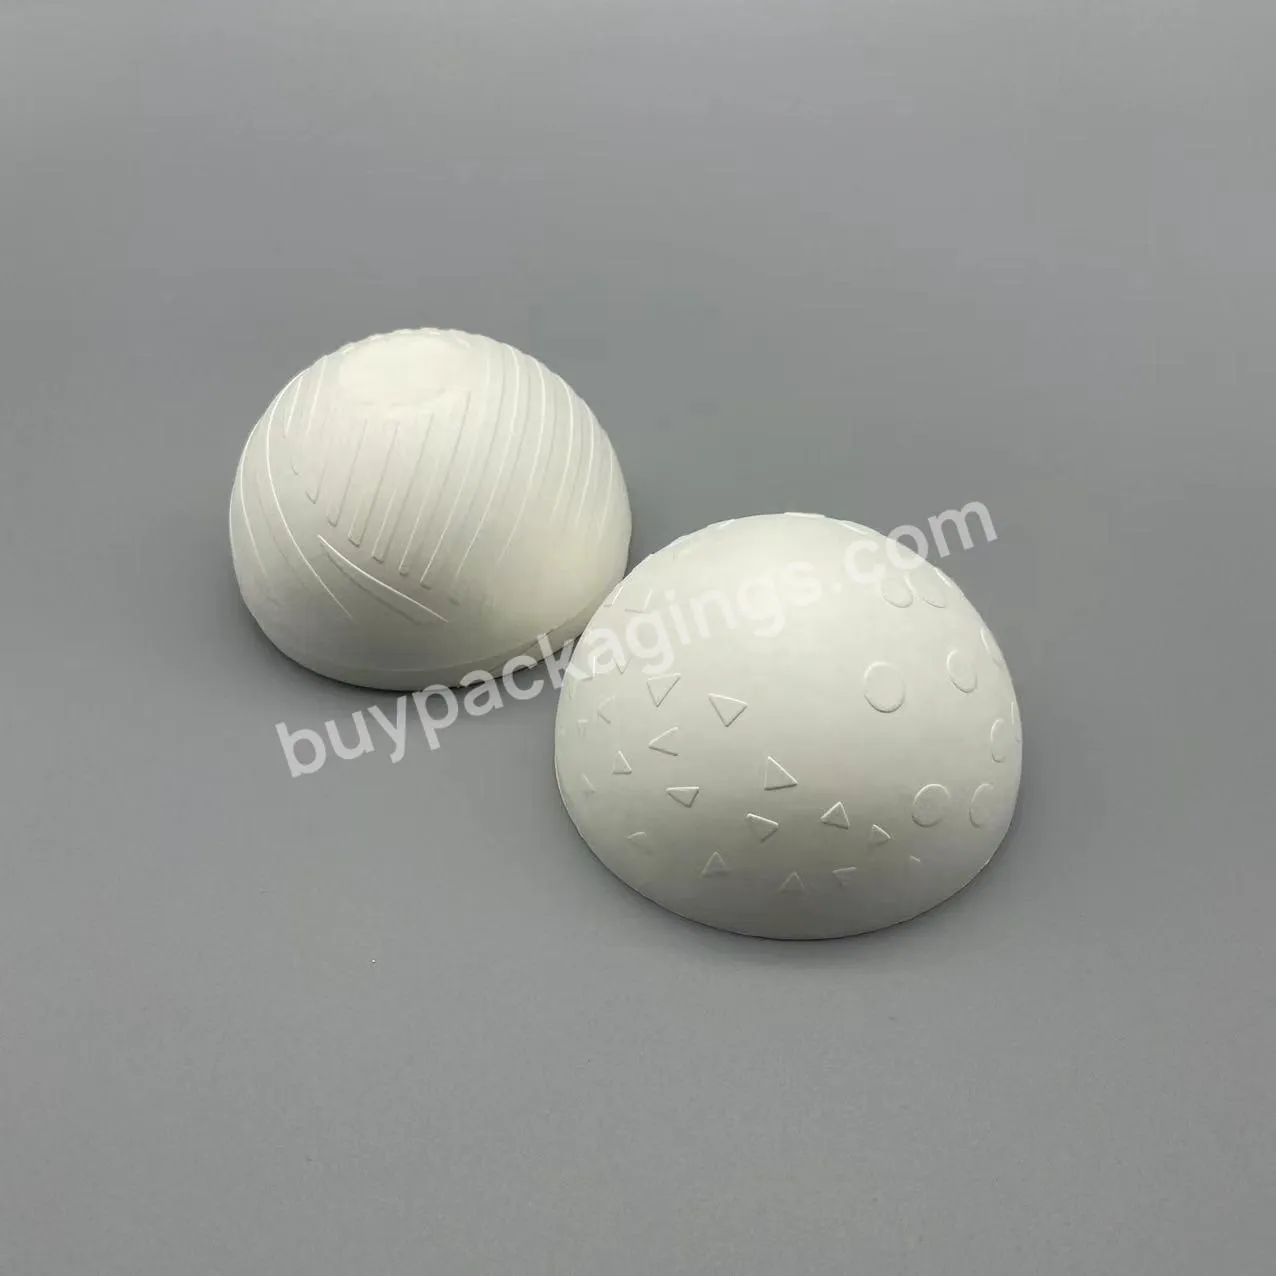 Disposable Custom Eco-friendly Soap Blister Bath Bomb Bath Ball Gift Packing Bauble Product Packaging - Buy Disposable Custom Blister Bath Bomb Packaging,Bath Ball Packaging,Eco-friendly Soap Packaging.